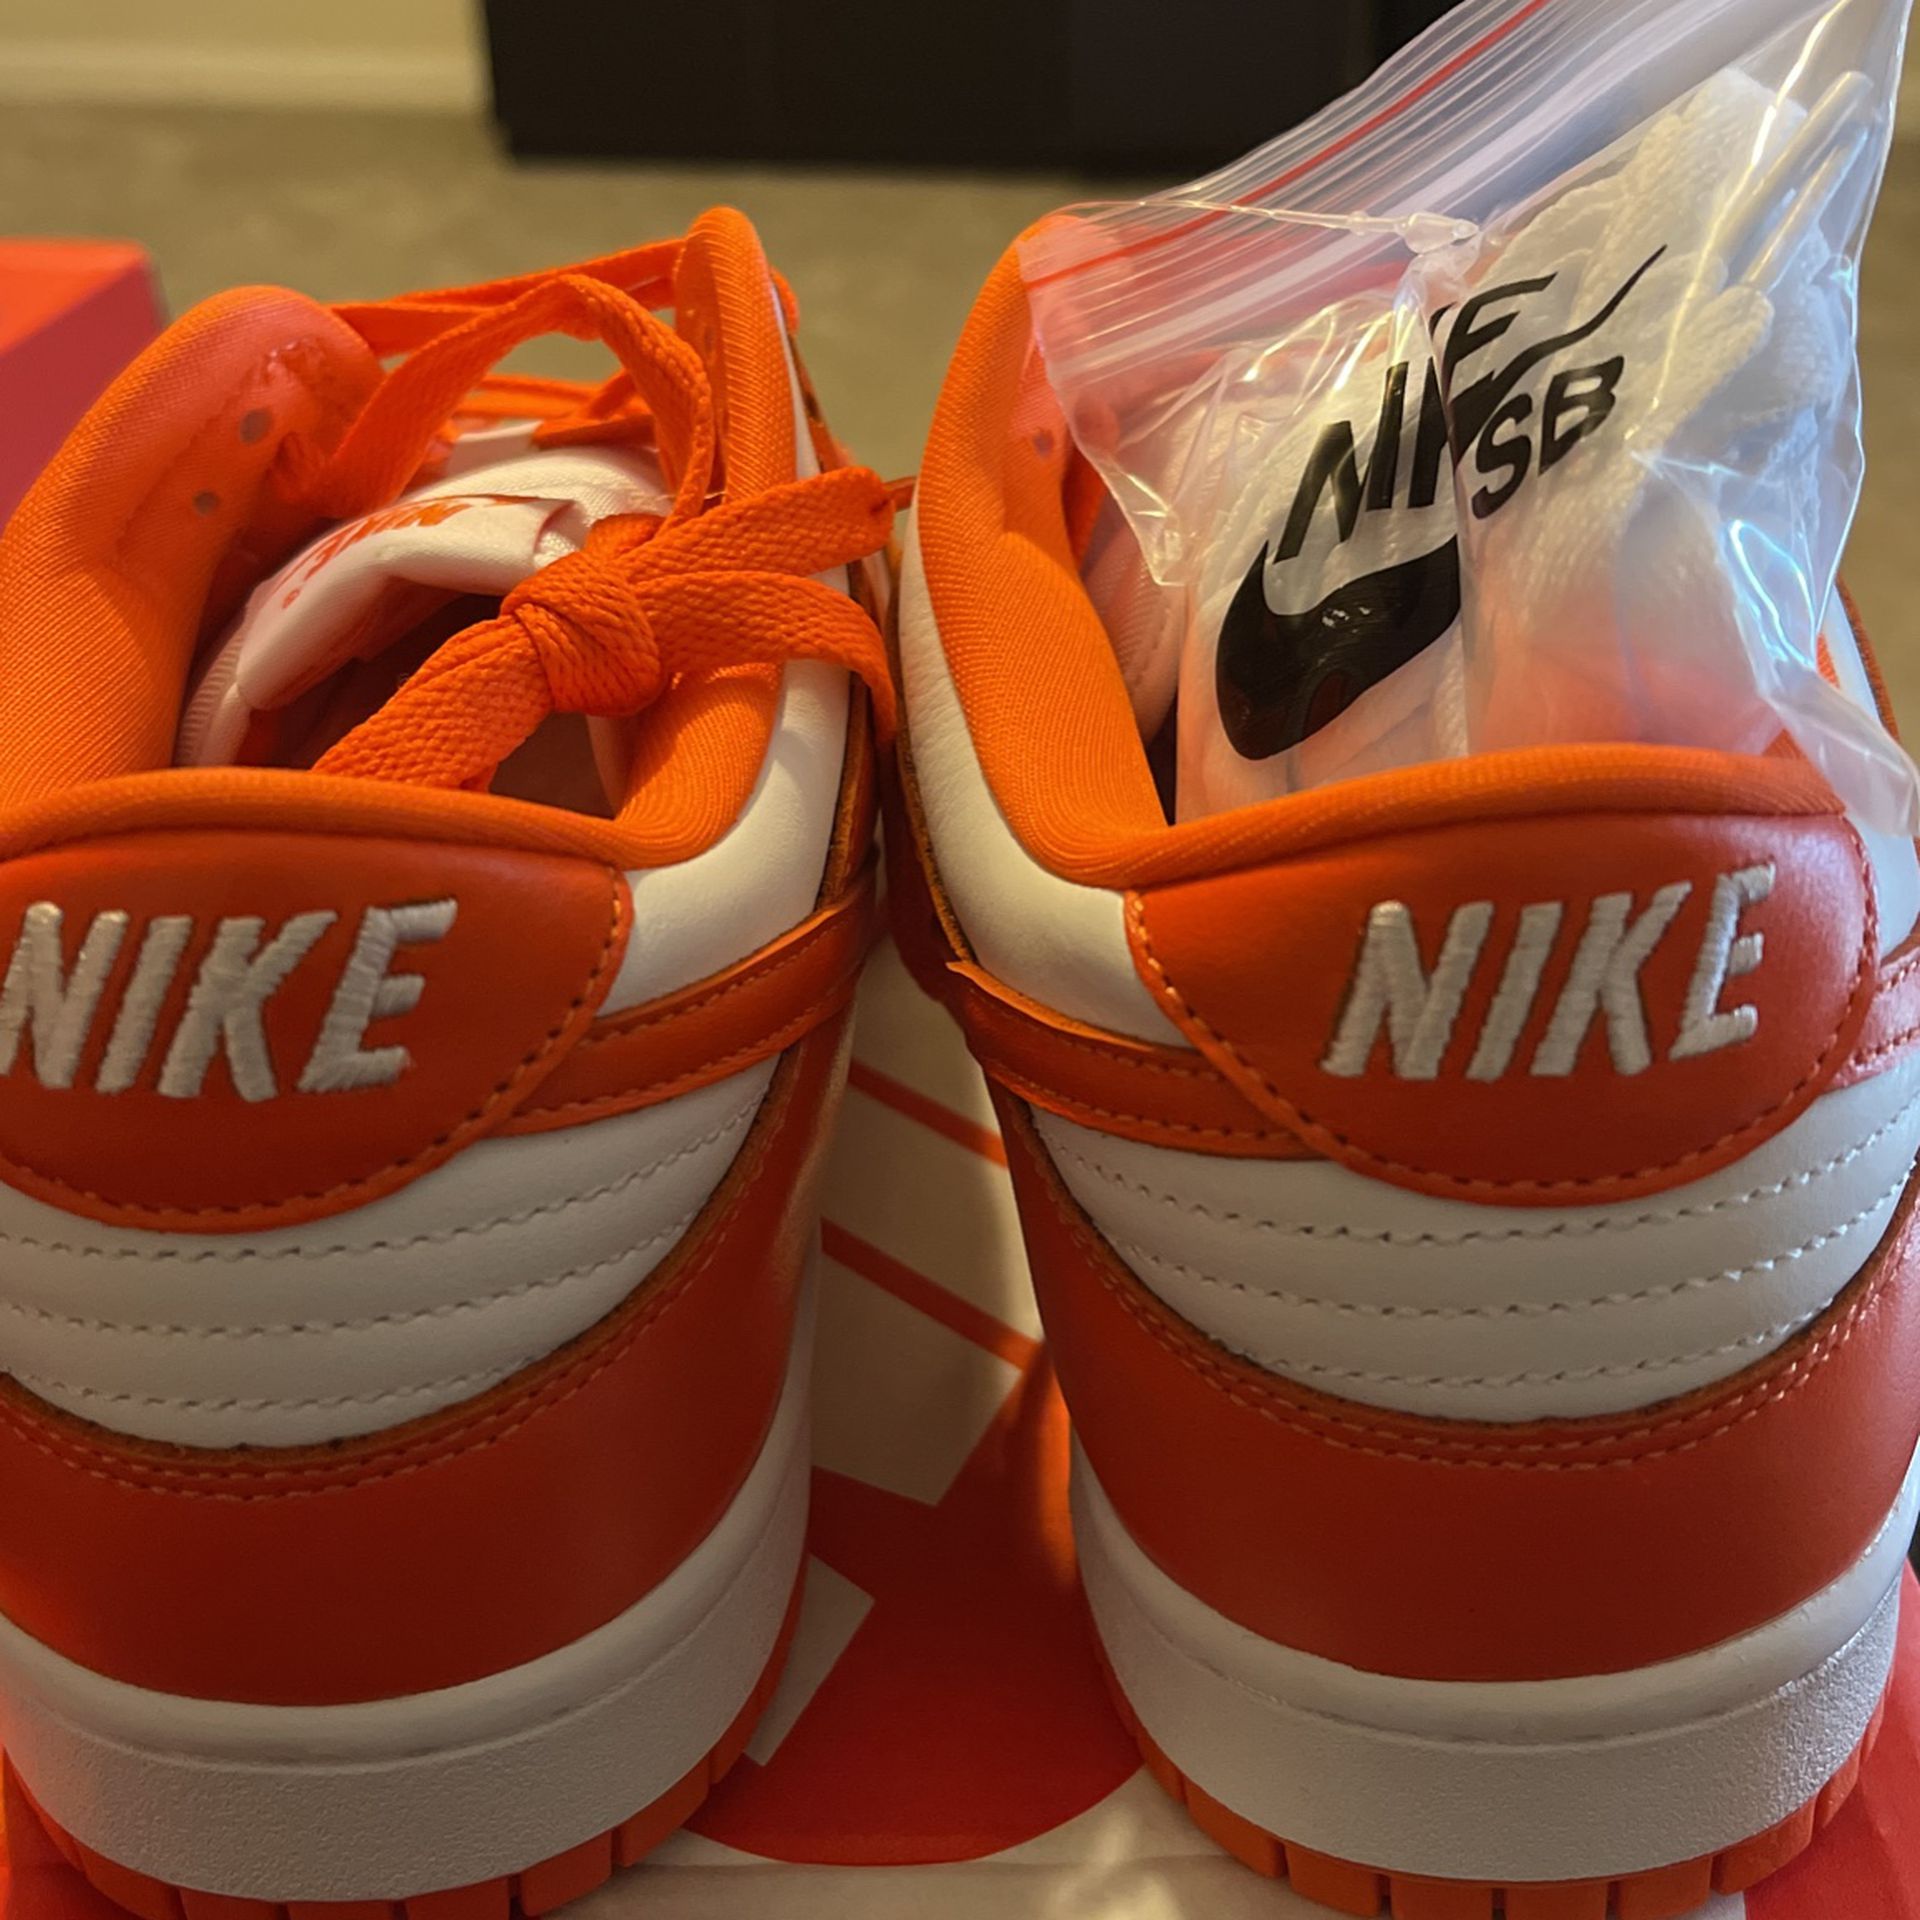 DS Dunk Low Syracuse for Sale in Jacksonville, FL - OfferUp